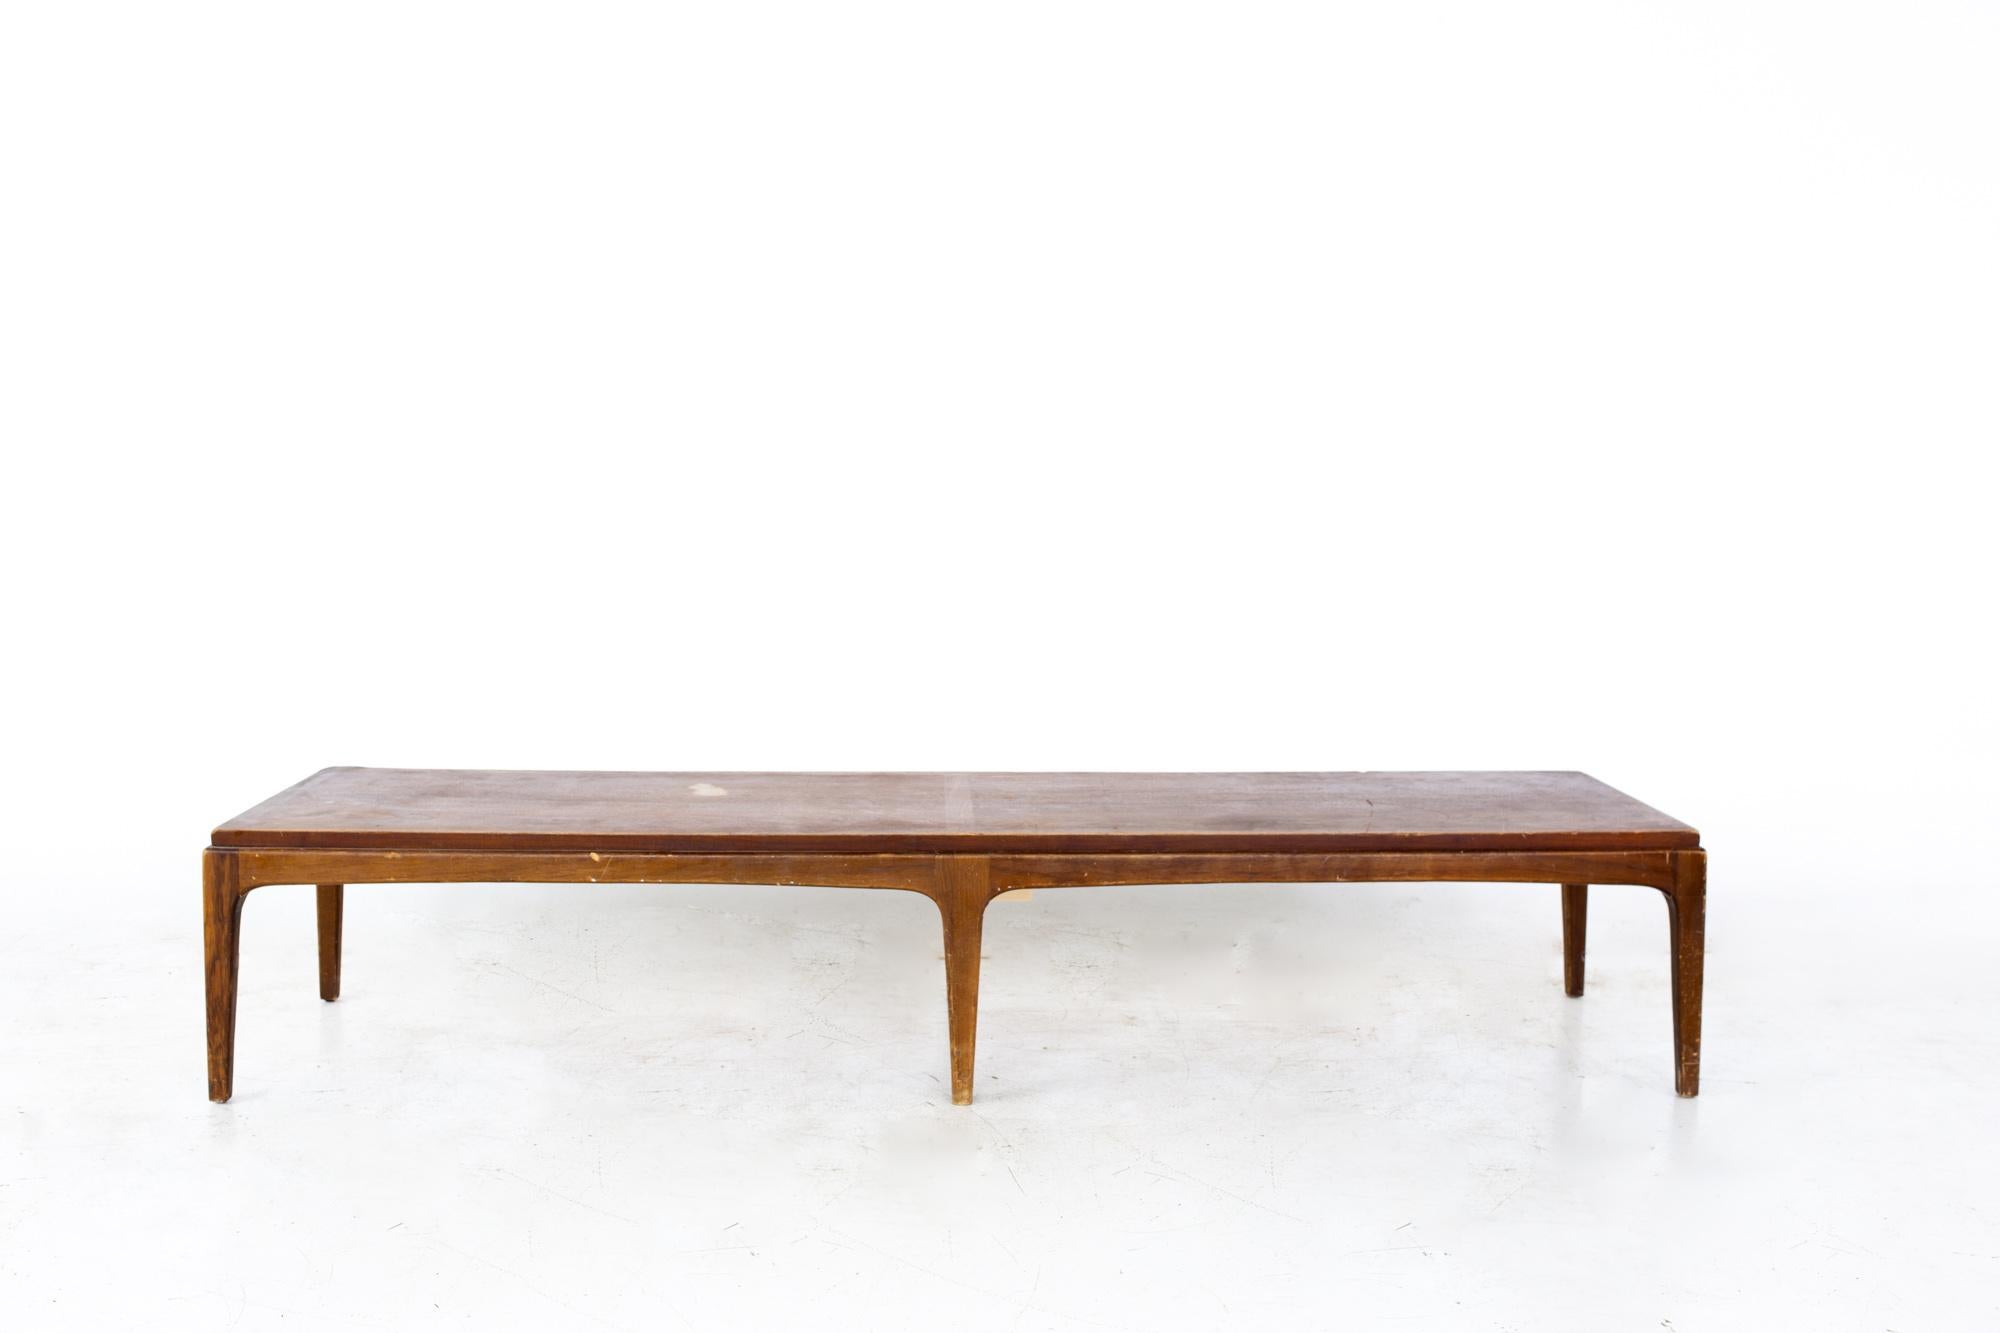 Paul McCobb style lane Rhythm mid century walnut coffee table
Coffee table measures: 70.5 wide x 18.5 deep x 13.5 inches high

All pieces of furniture can be had in what we call restored vintage condition. That means the piece is restored upon